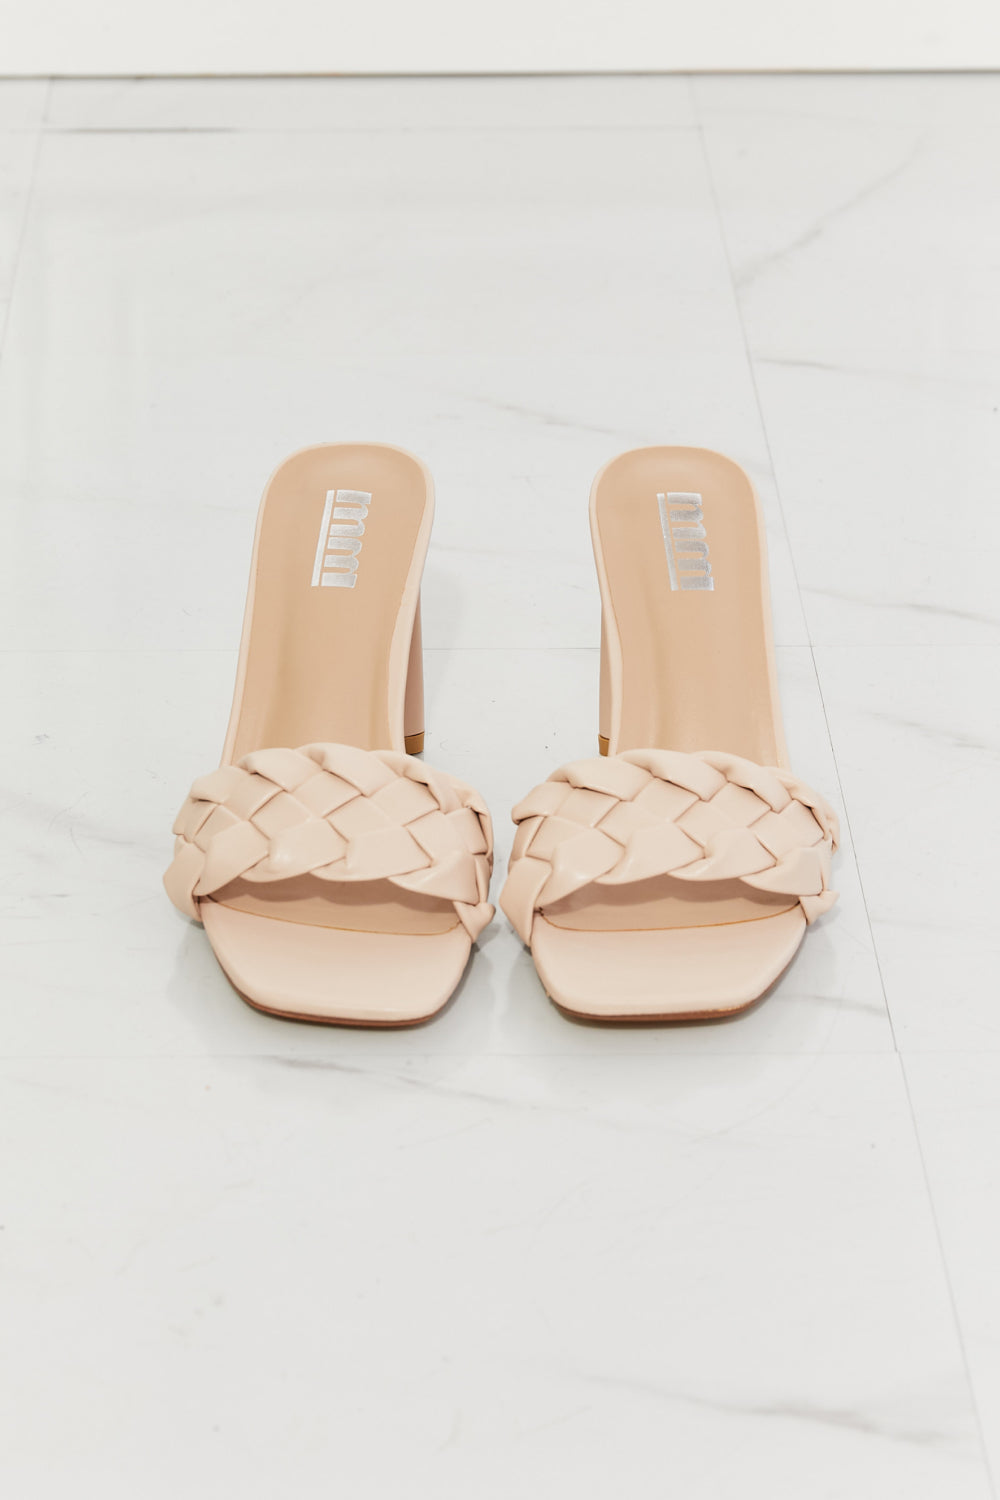 MMShoes Top of the World Braided Block Heel Sandals in Beige - The Fashion Unicorn